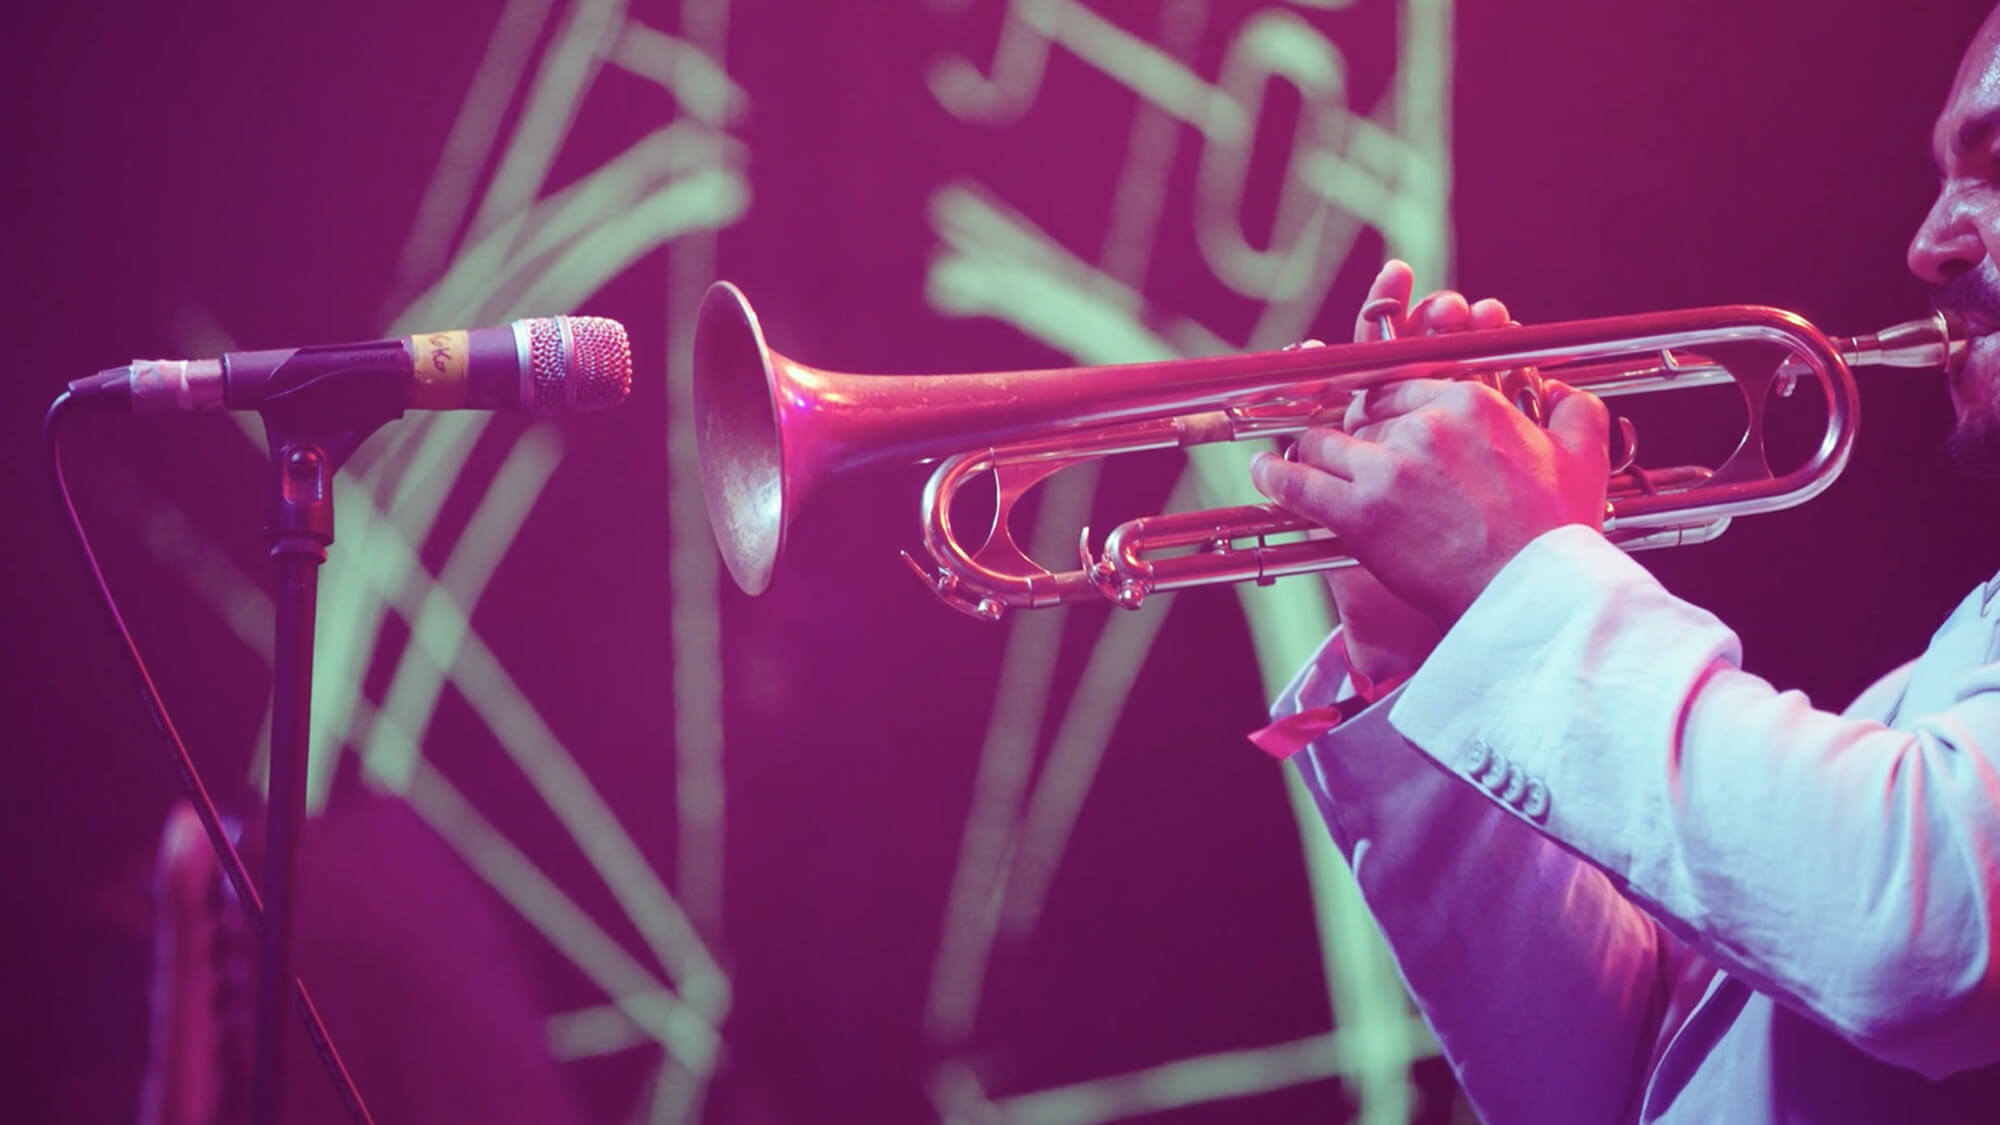 Still image of a trumpet player on stage at an Audemars Piguet music event, filmed by Rise Media